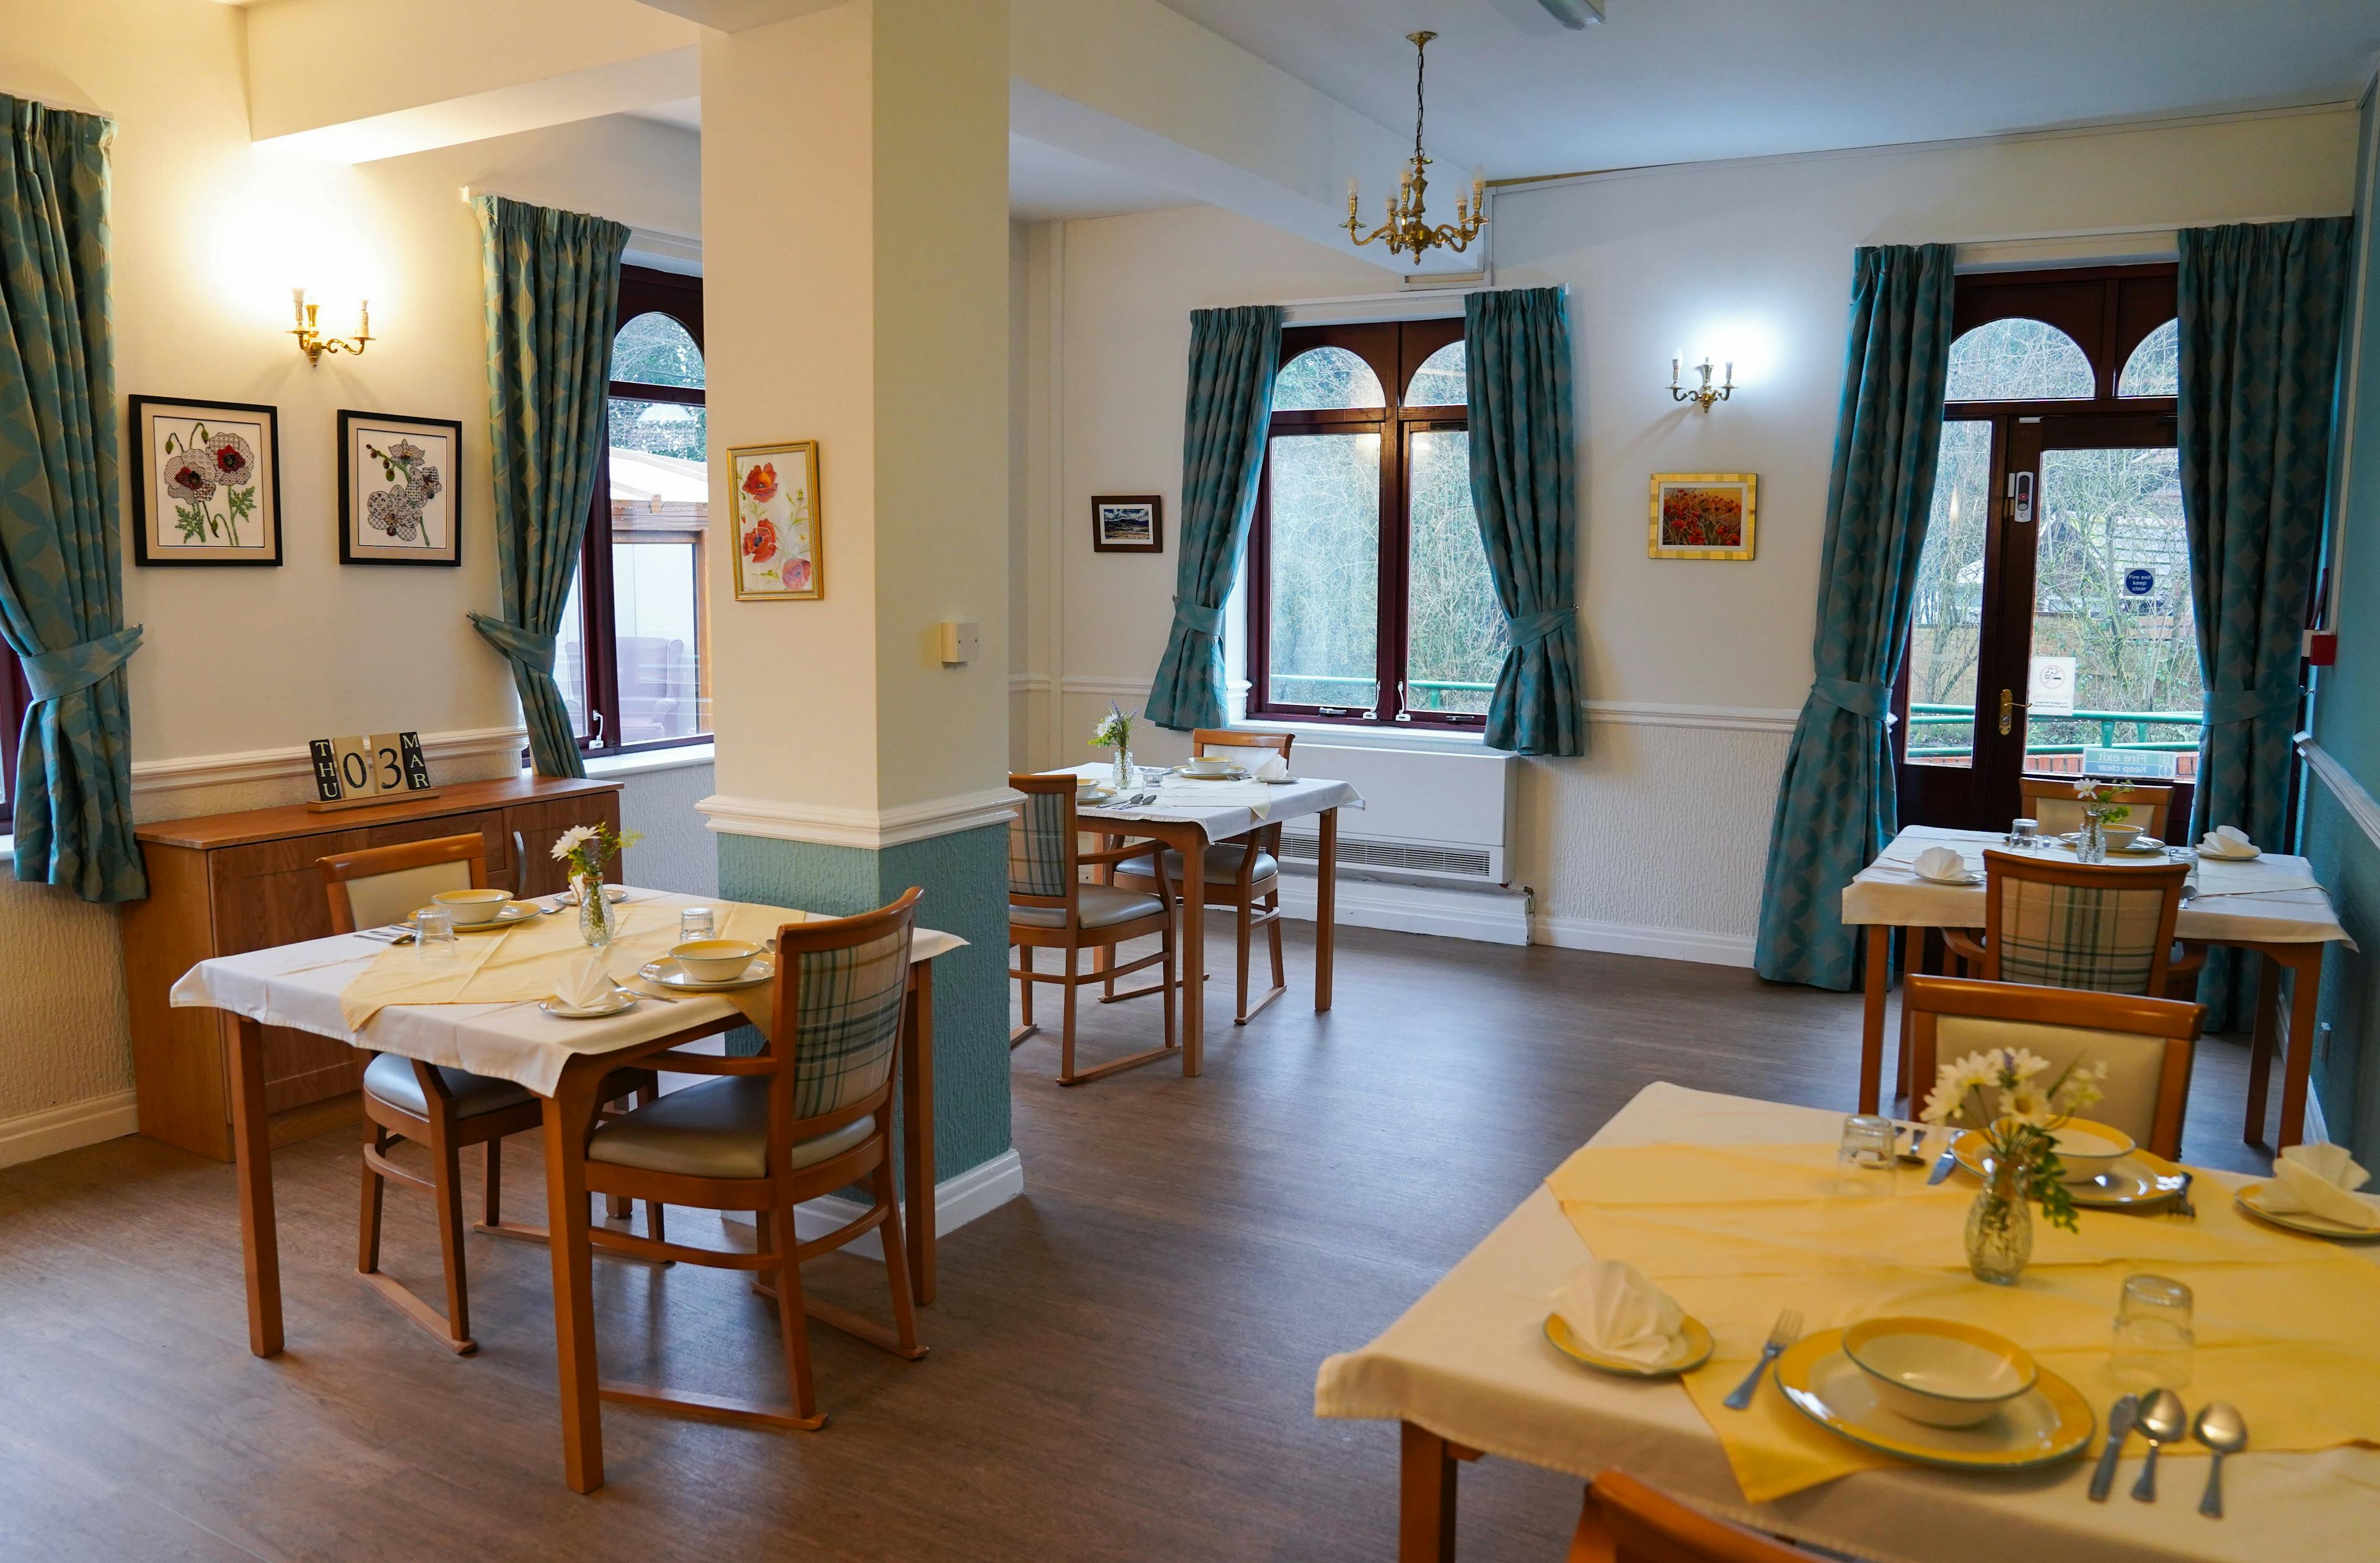 Dining area of High Peak care home in Warrington, Cheshire